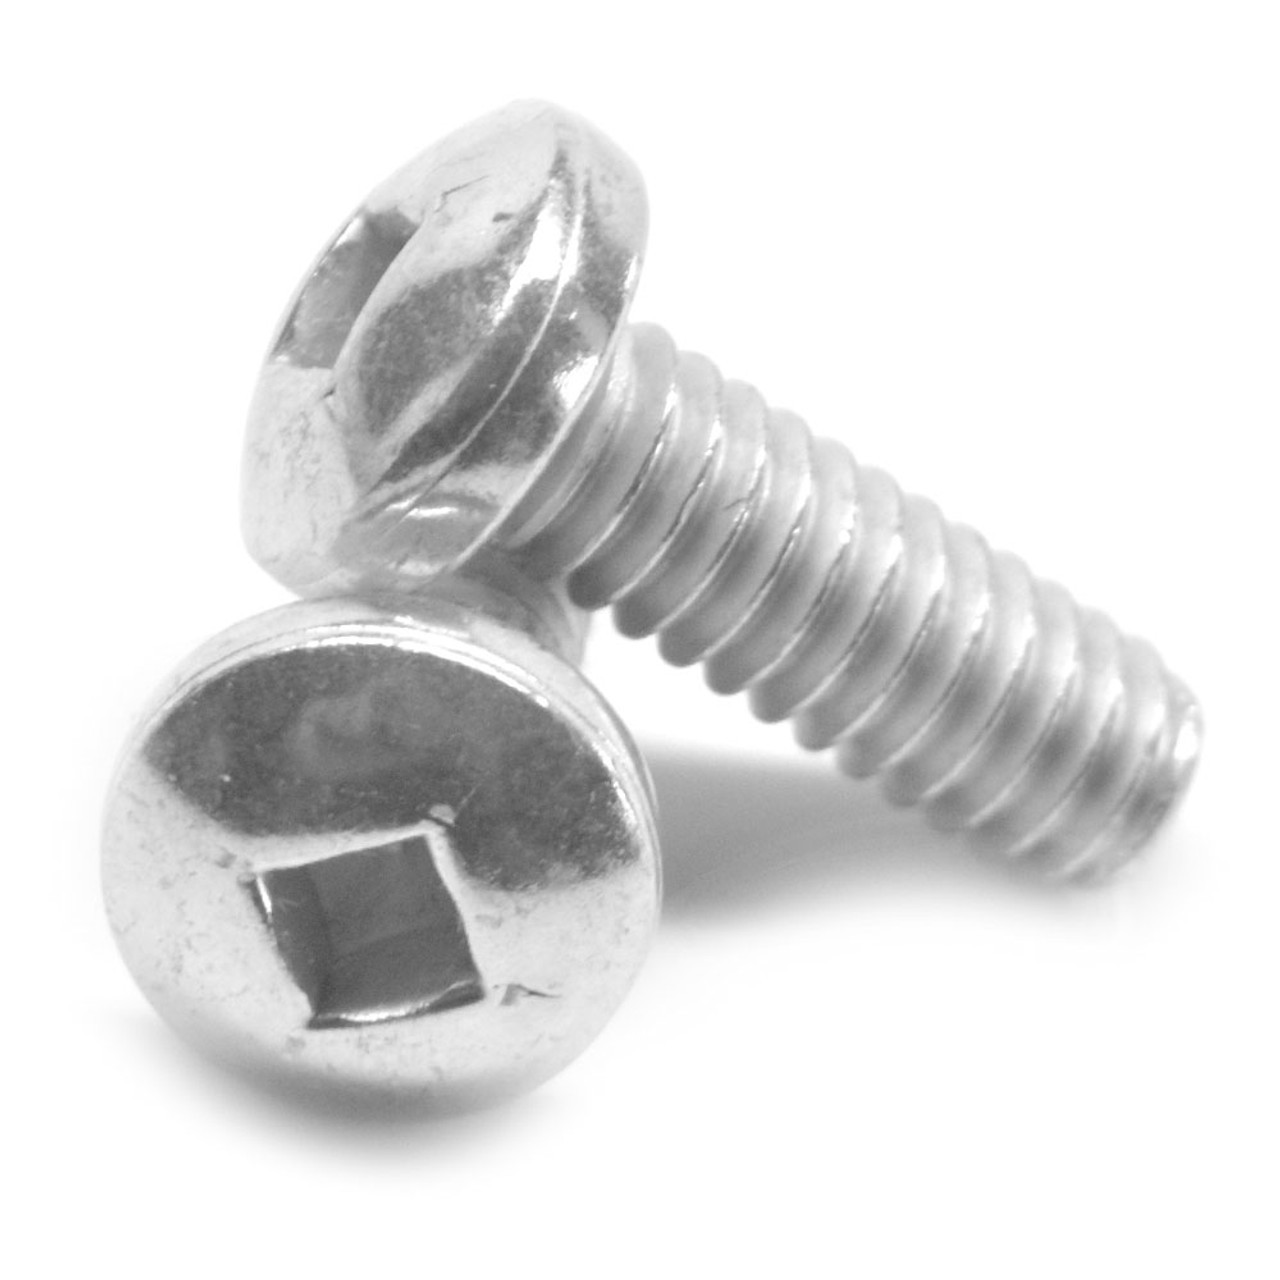 #6-32 x 1" (FT) Coarse Thread Machine Screw Square Drive Pan Head Stainless Steel 18-8